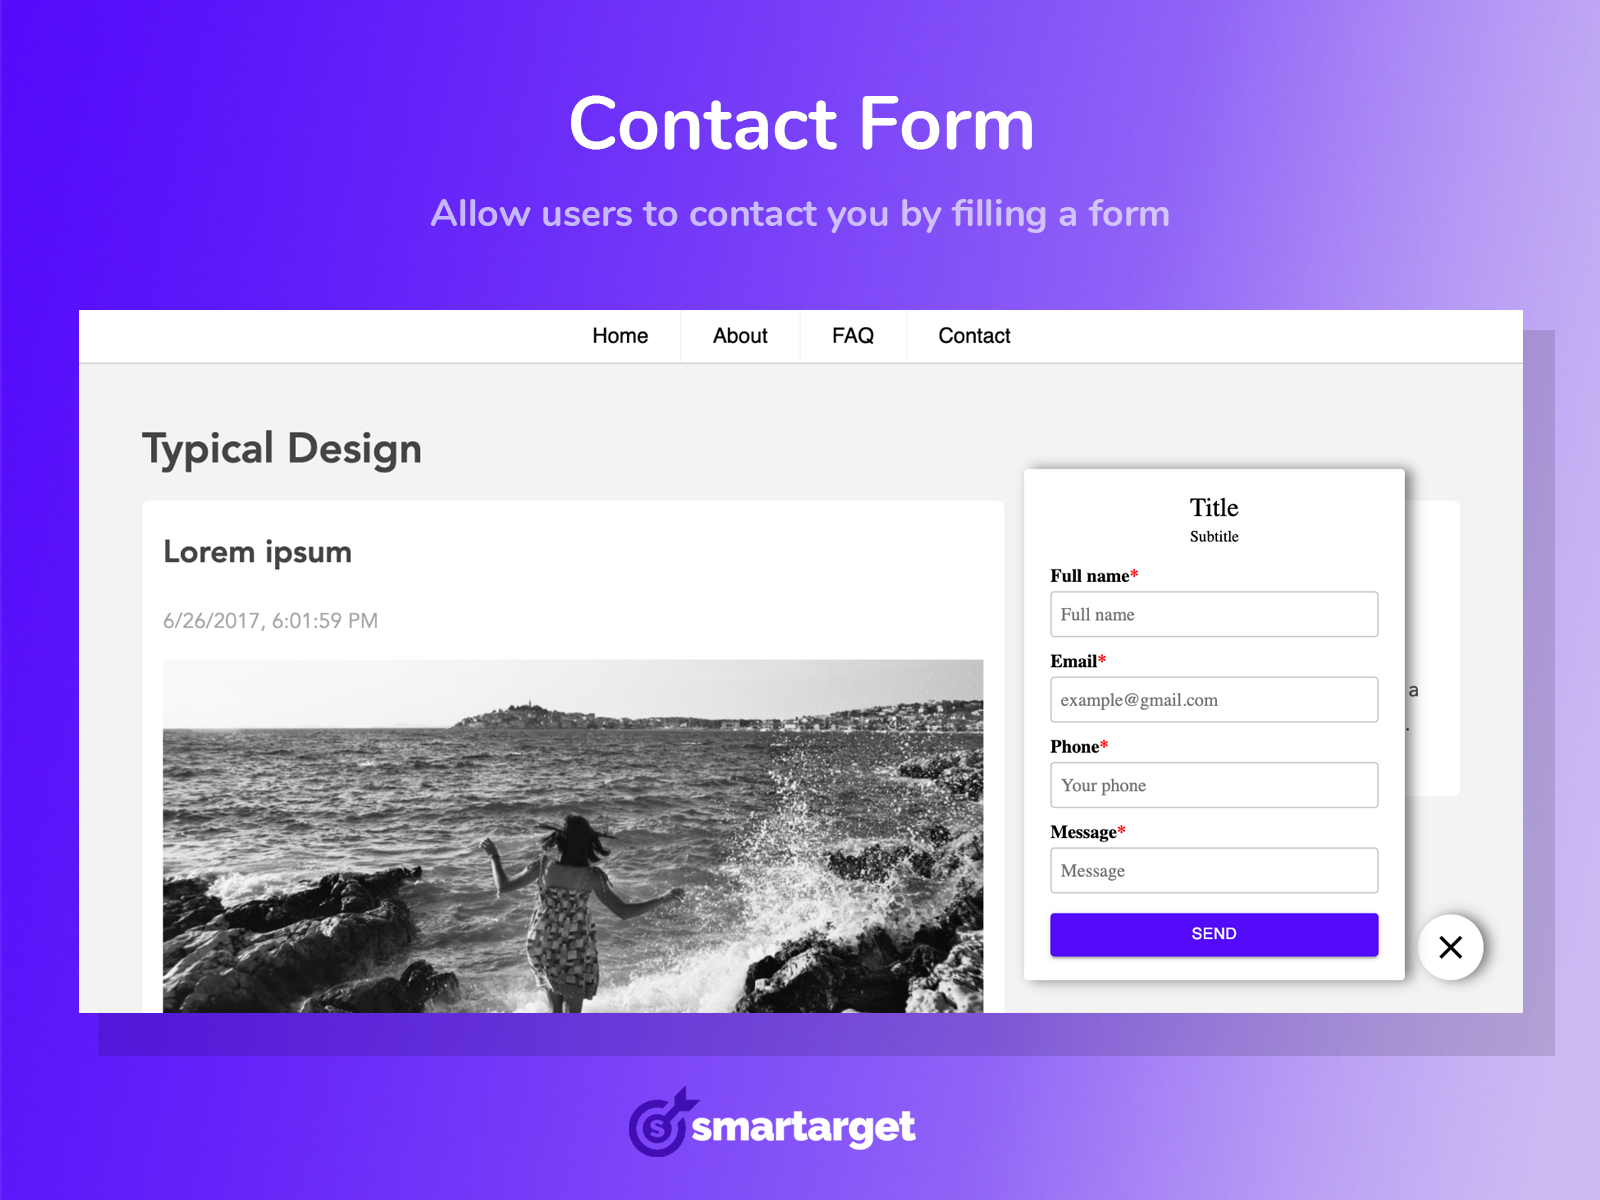 Smartarget - Contact Form Image